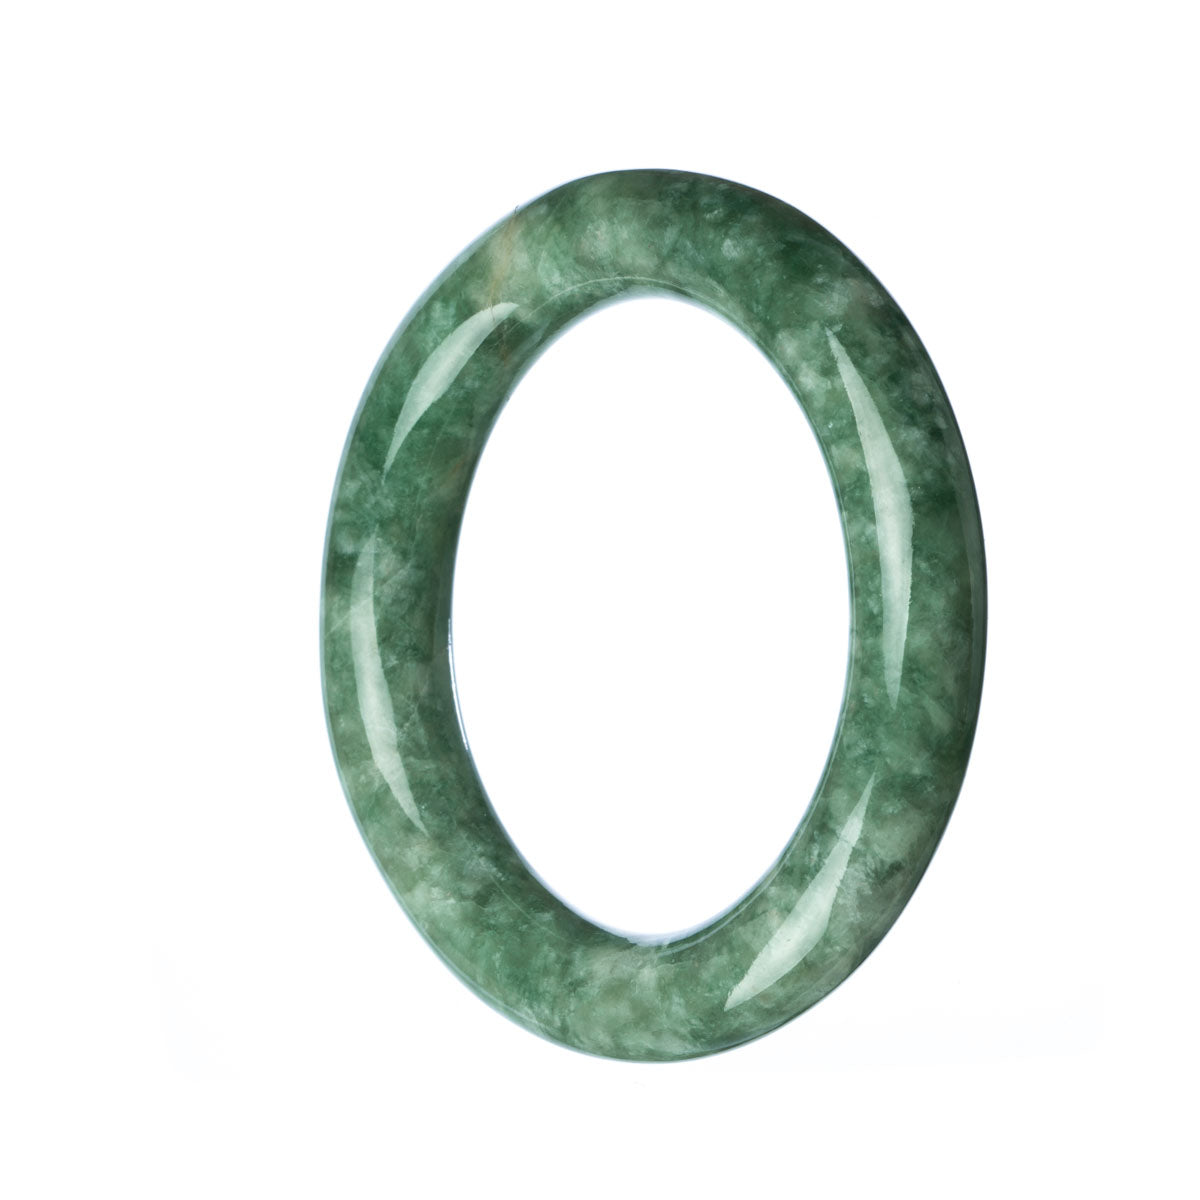 An exquisite jade bangle bracelet made from Grade A Green Burmese Jade, measuring 52mm in diameter. Crafted with precision and elegance, this bracelet from MAYS GEMS is a true gemstone treasure.